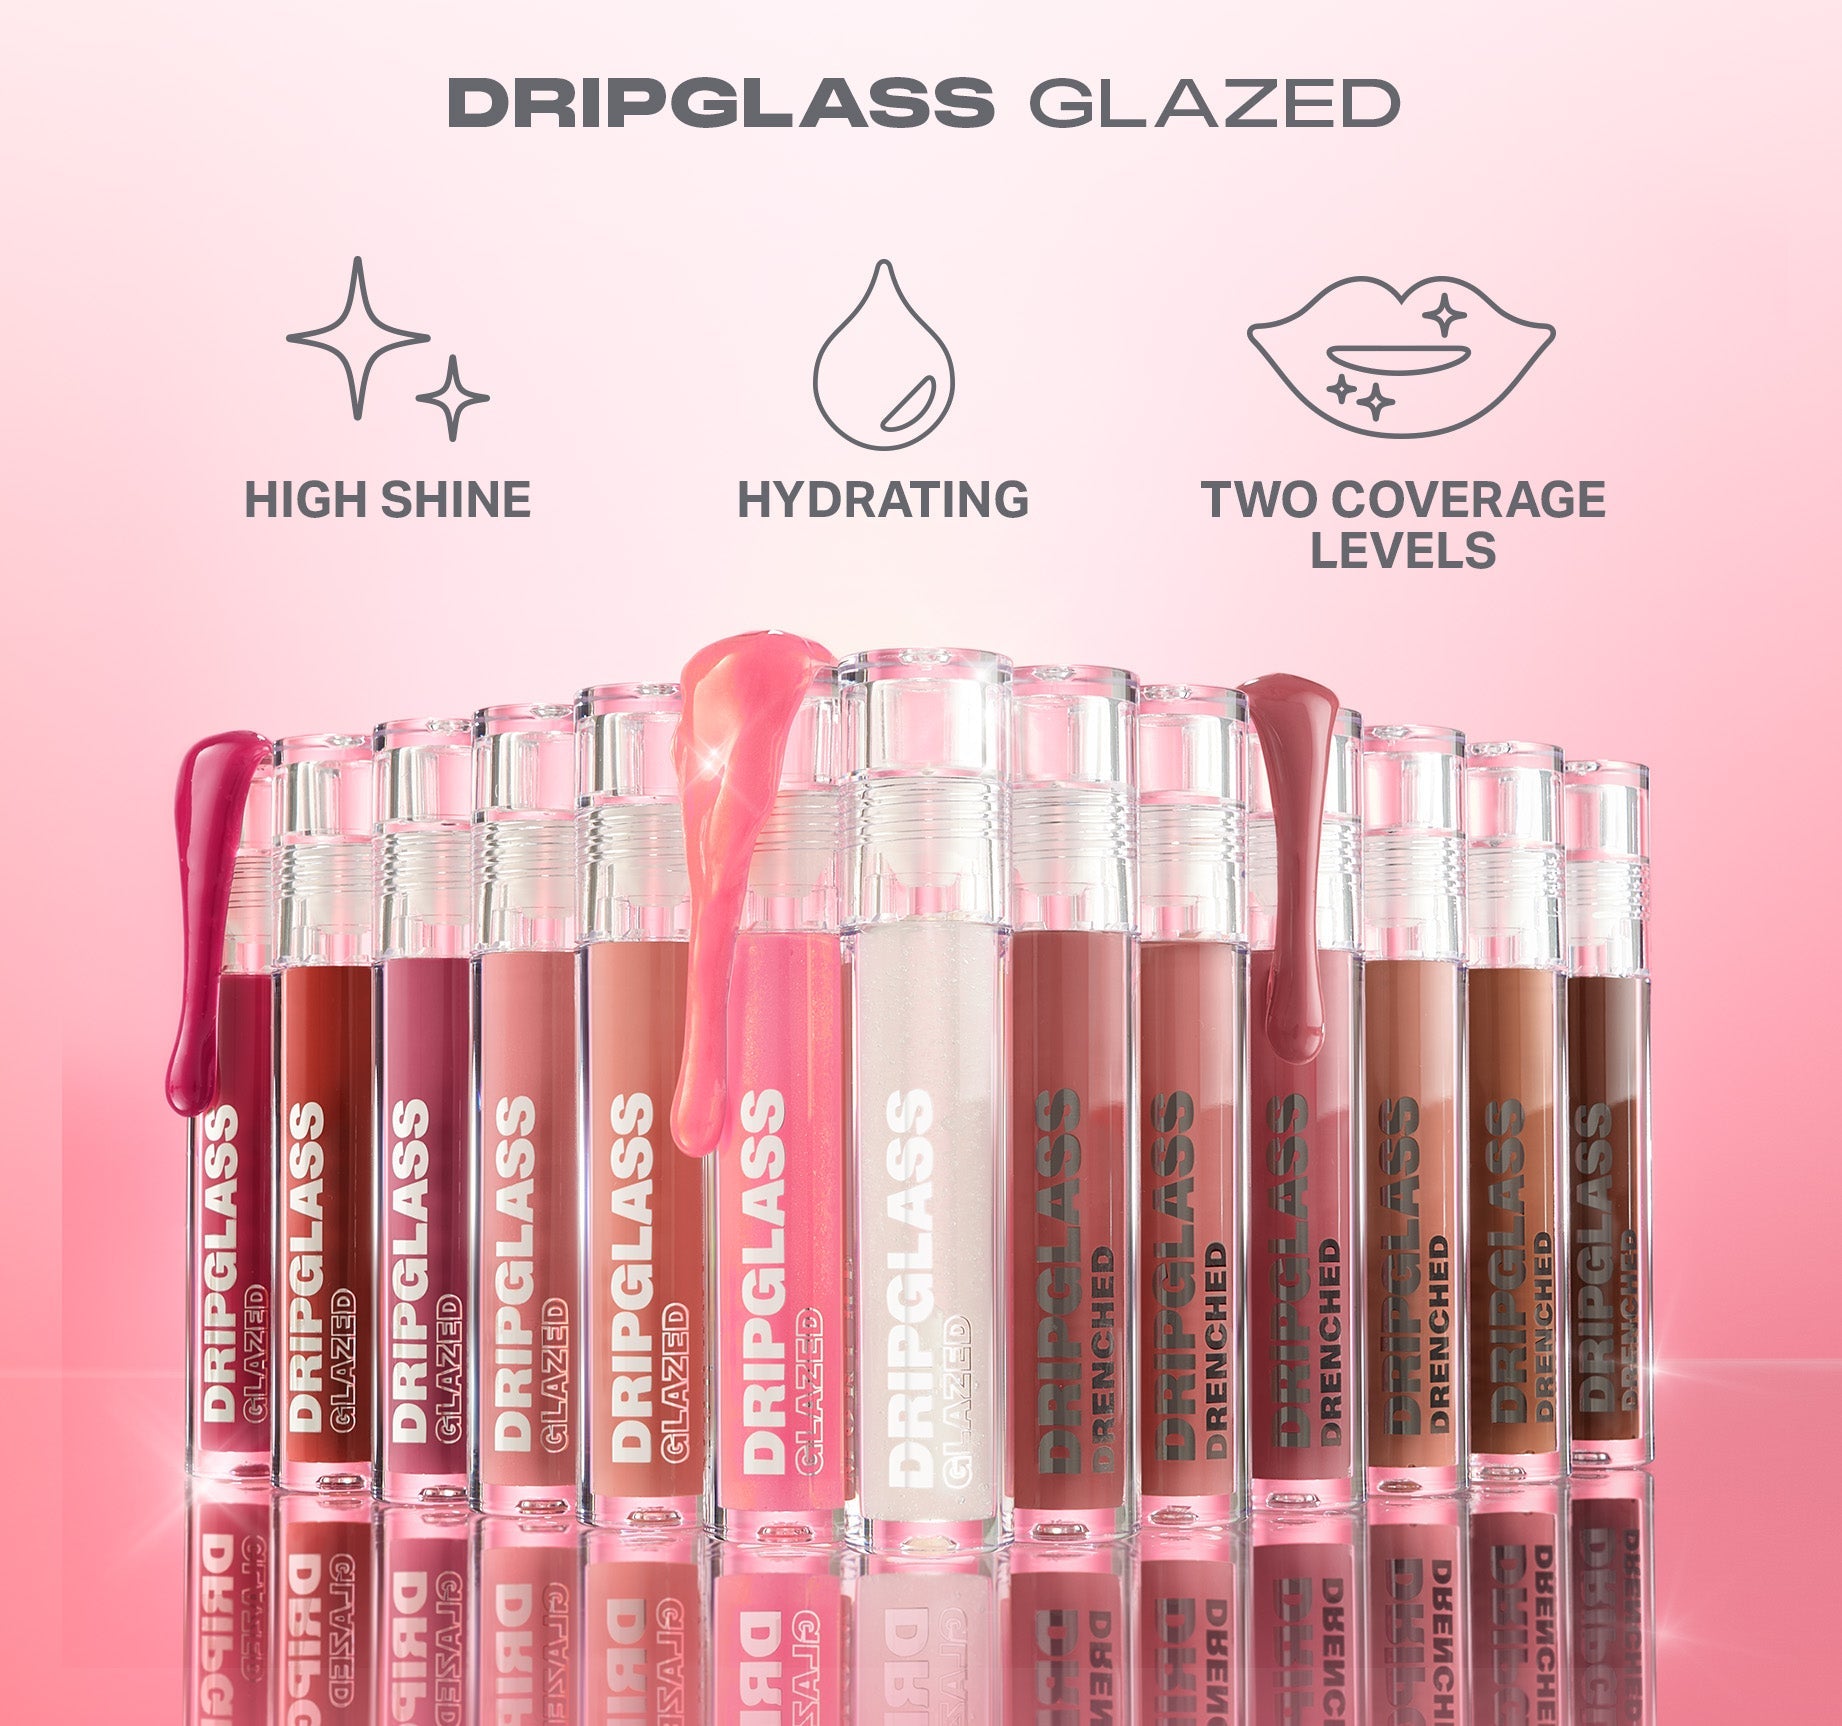 Dripglass Glazed High Shine Lip Gloss - Opalescent Orchid - Image 7